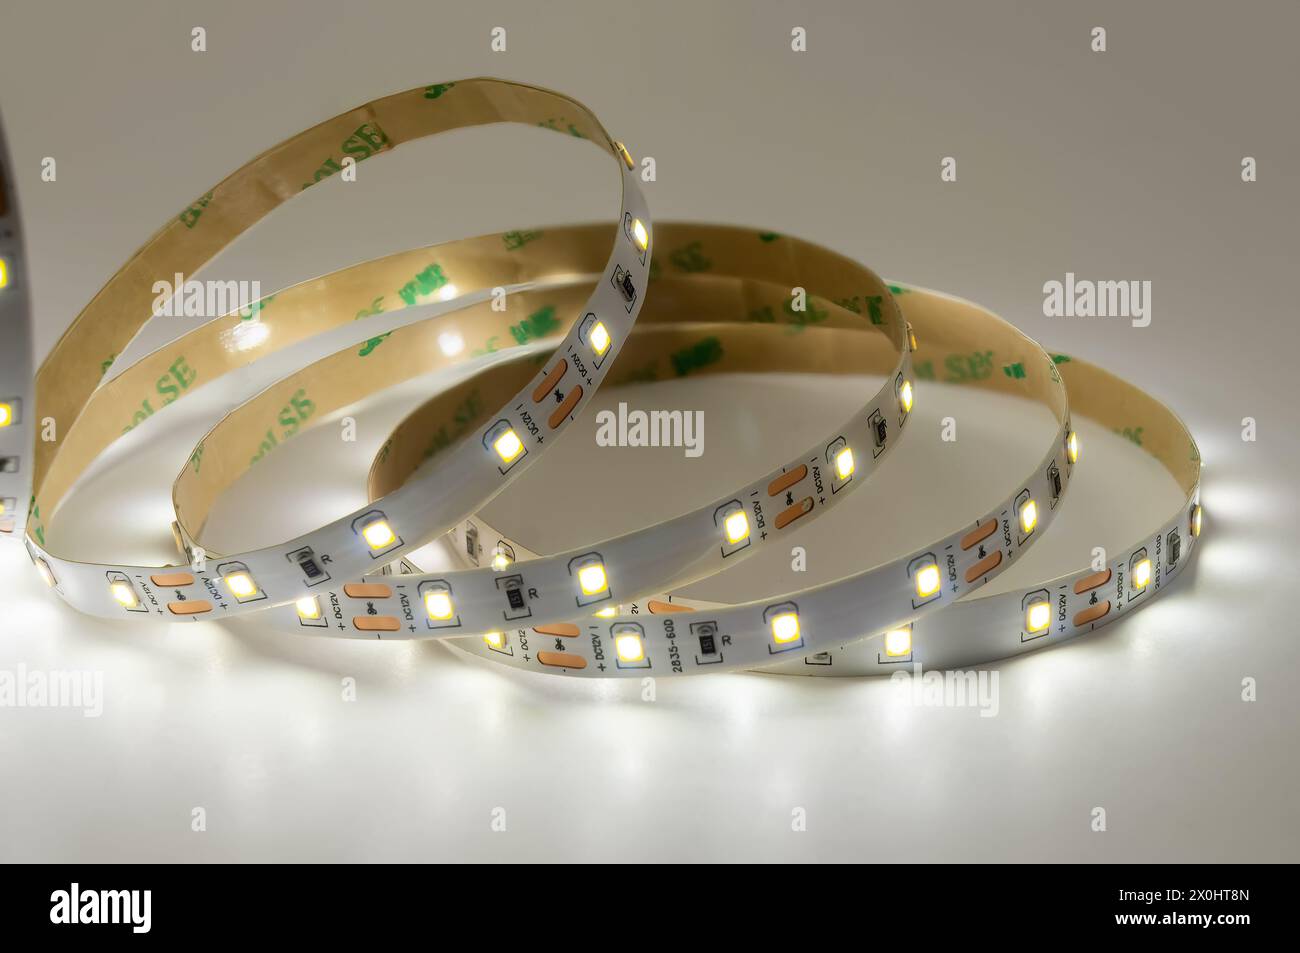 Discover versatility of modern lighting with illuminated LED strip light coils. White glowing LED tape, arranged in circular shapes, showcases flexibi Stock Photo